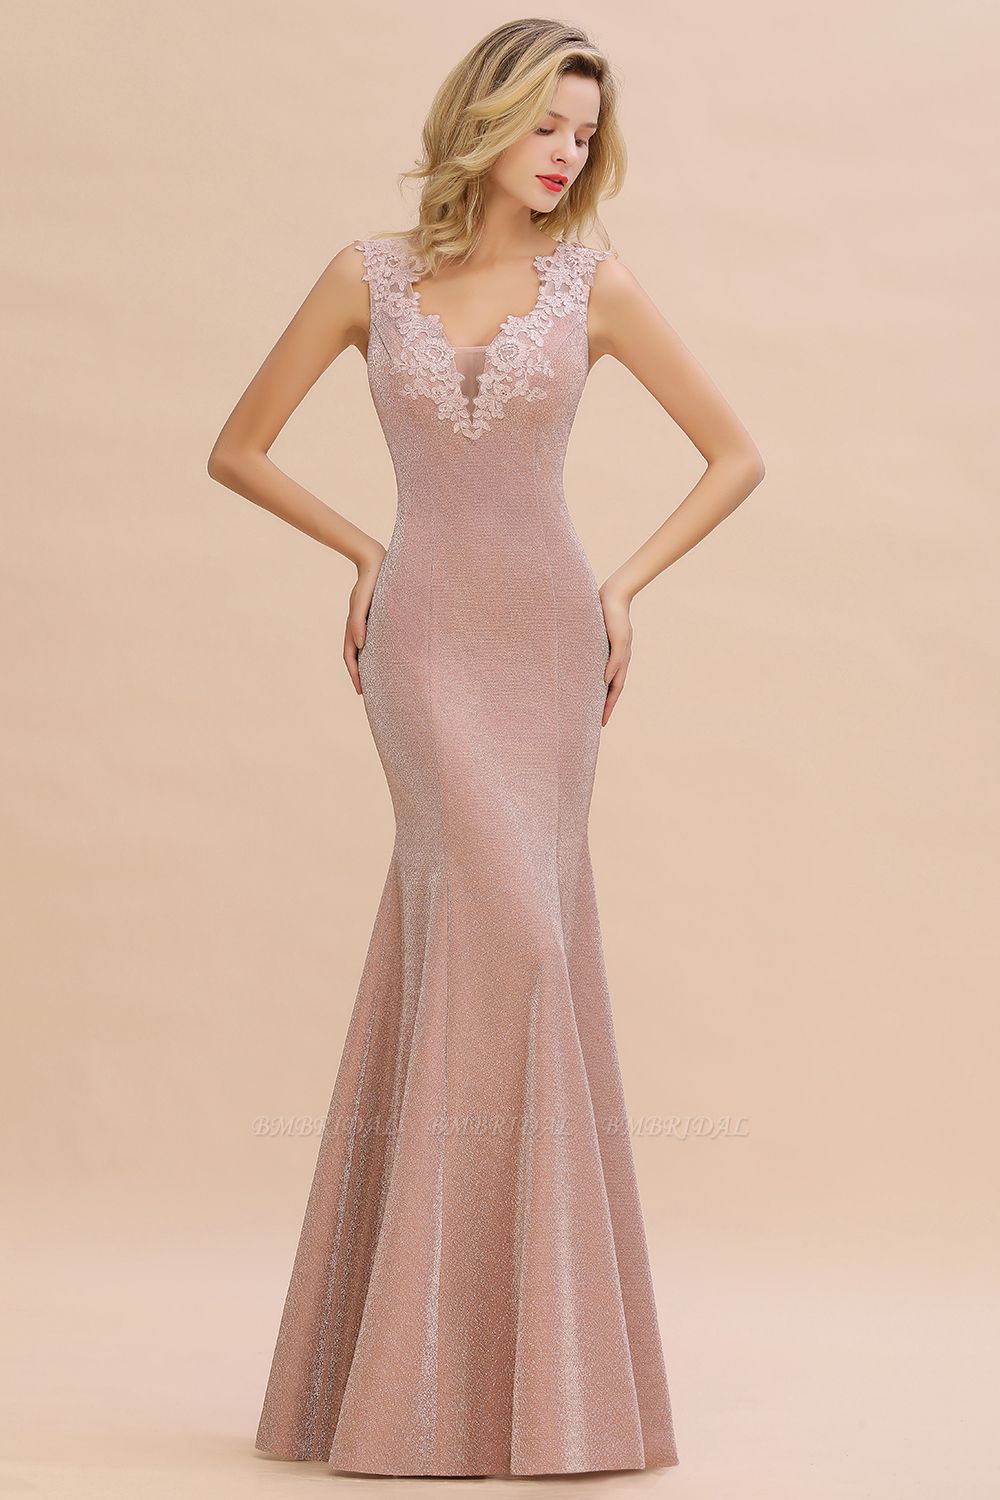 BMbridal Dusty Pink Shinning Long Prom Dress Mermaid With Appliques